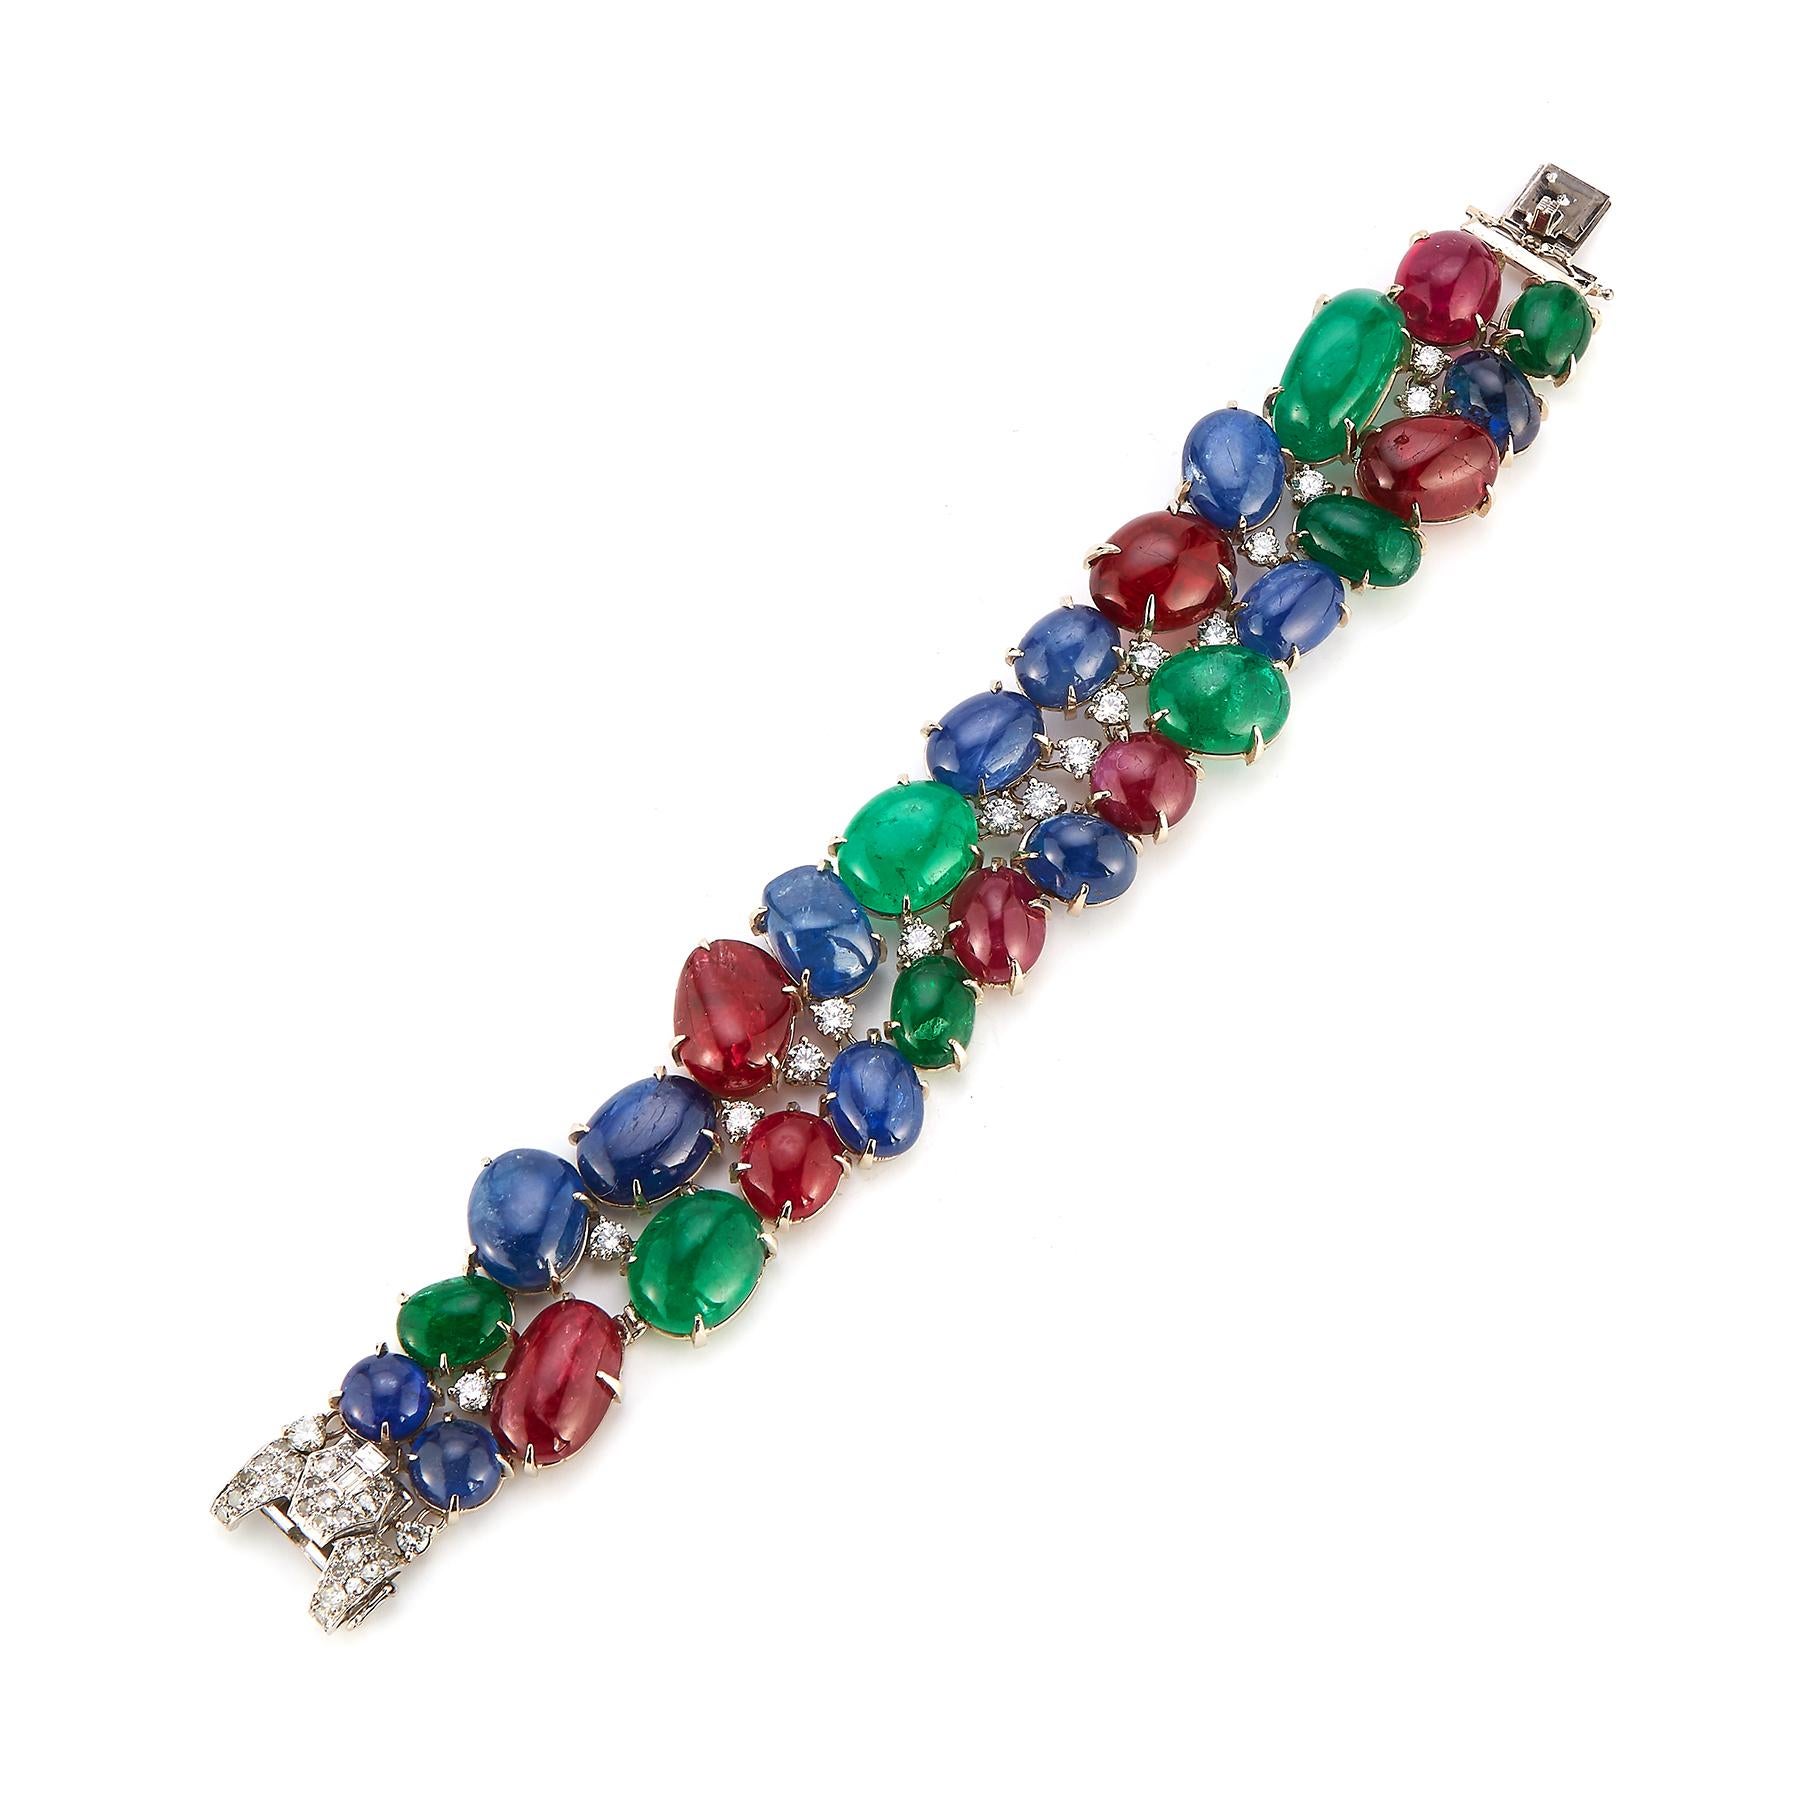 Art Deco Cabochon Tutti Frutti Bracelet

This bracelet features a vibrant display of sapphires, emeralds, spinels and diamonds, set in platinum.

Made in France Circa 1925

Measurements: approximately 7.25 inches long